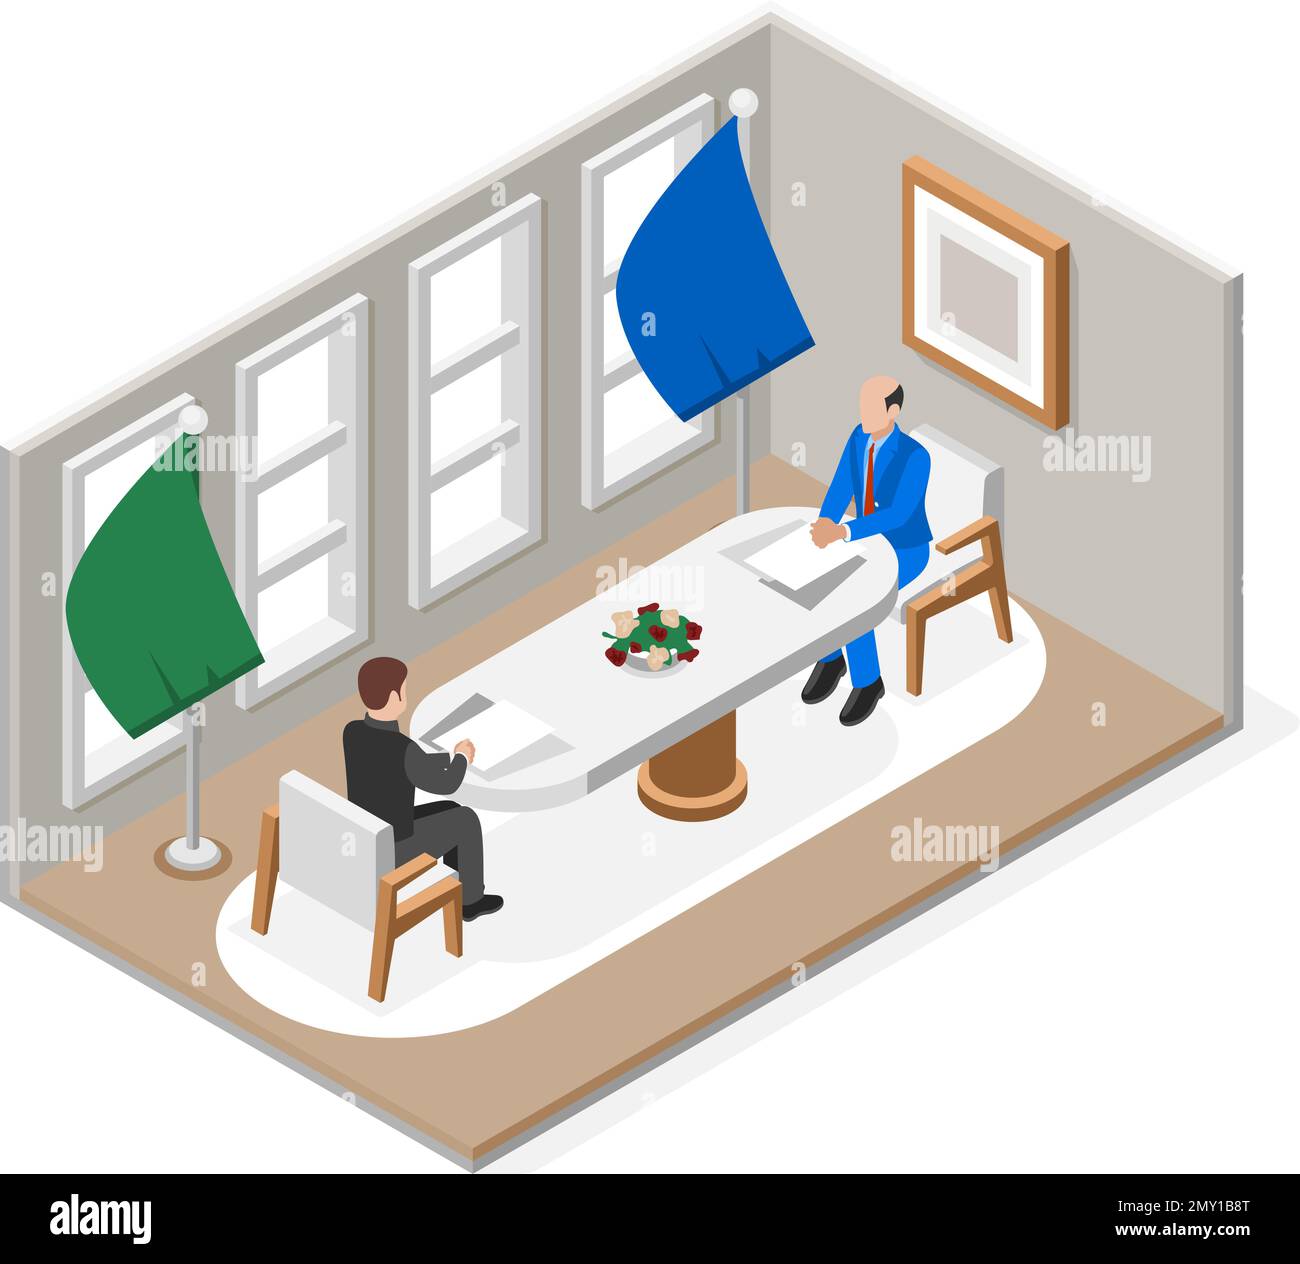 Diplomacy and diplomat isometric composition two high ranking officials sitting across the table from each other vector illustration Stock Vector